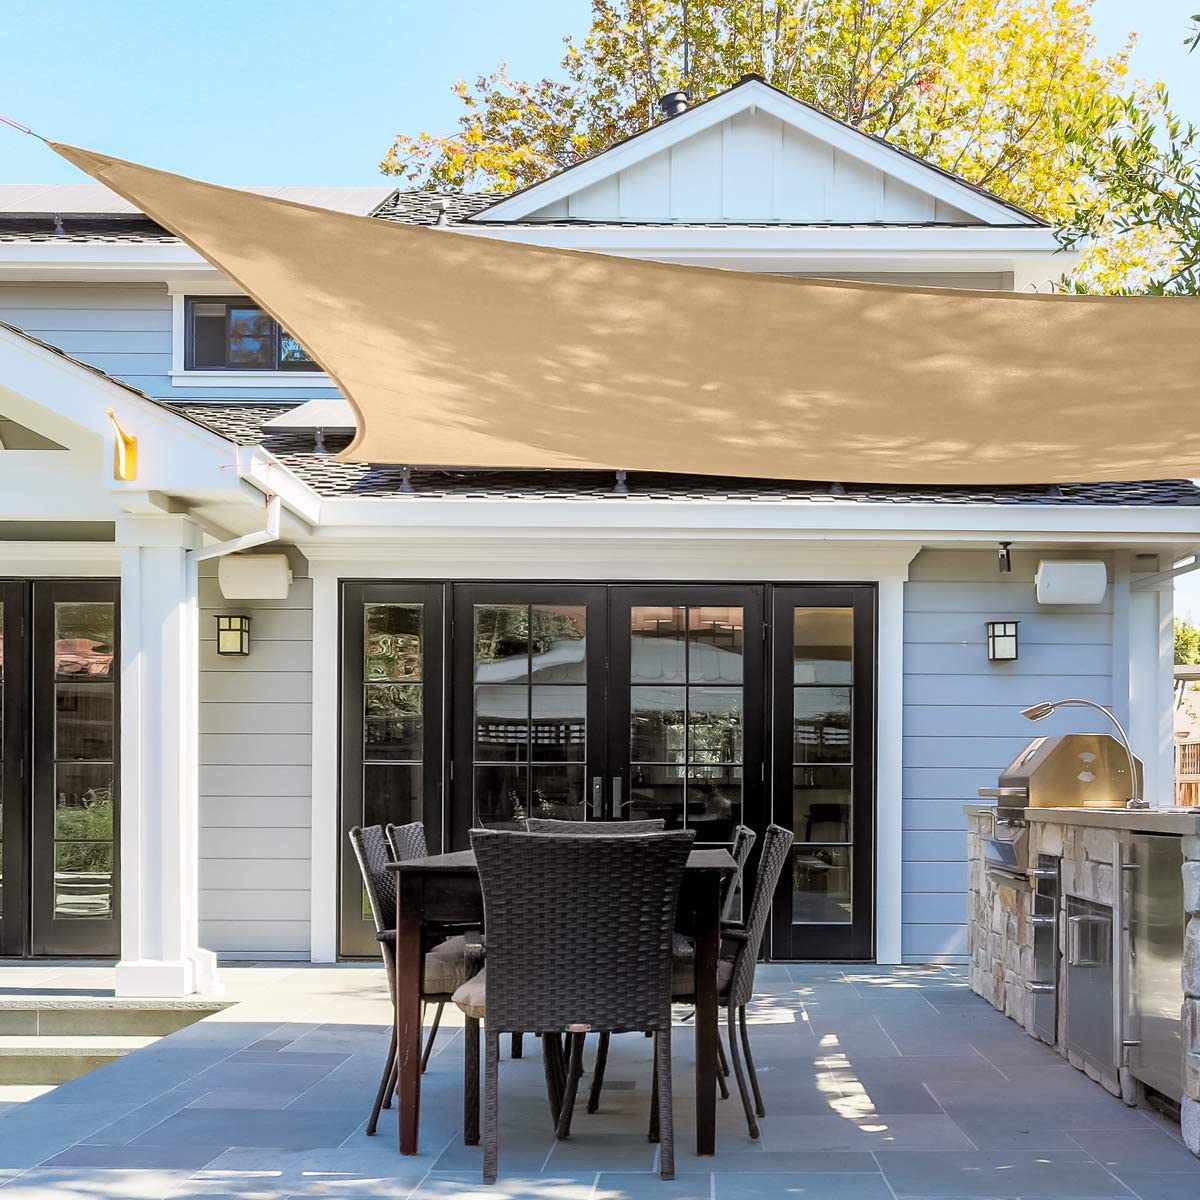 Outdoor Waterproof Sun Shade Sail Opaque Privacy Protection Canopy for Patio and Garden, Backyard Lawn